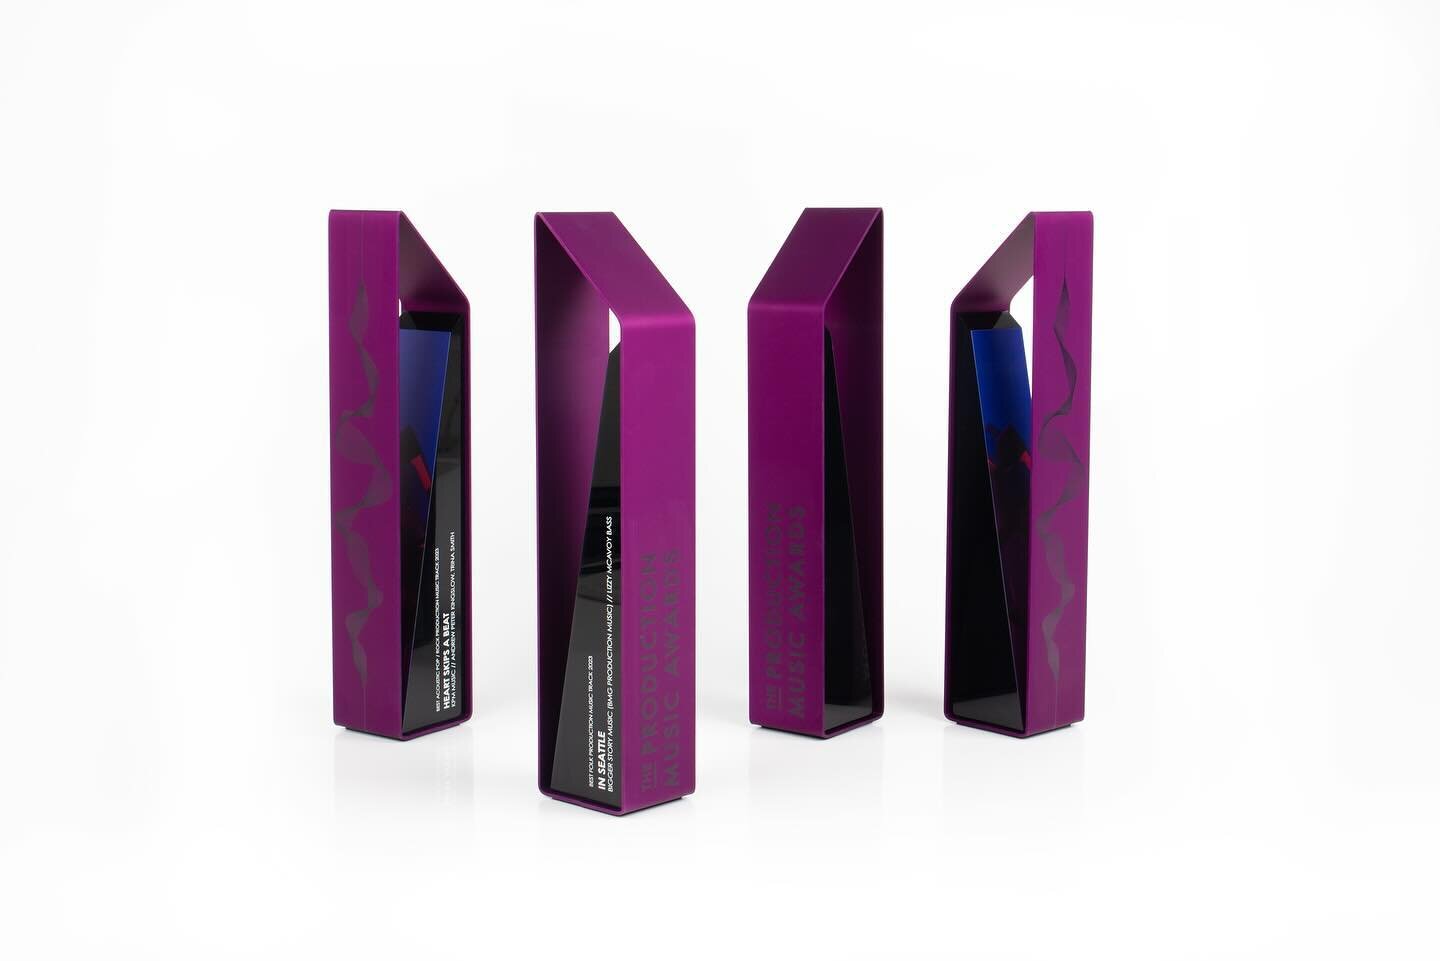 🟣 We can&rsquo;t get enough of this purple anodizing 😍 Glad we changed the color up this year for @productionmusicawards. Need to do more purple for sure. 

 - [ ] #customtrophy #customtrophies&nbsp; #customawards #moderndesign  #customdesigns #tro